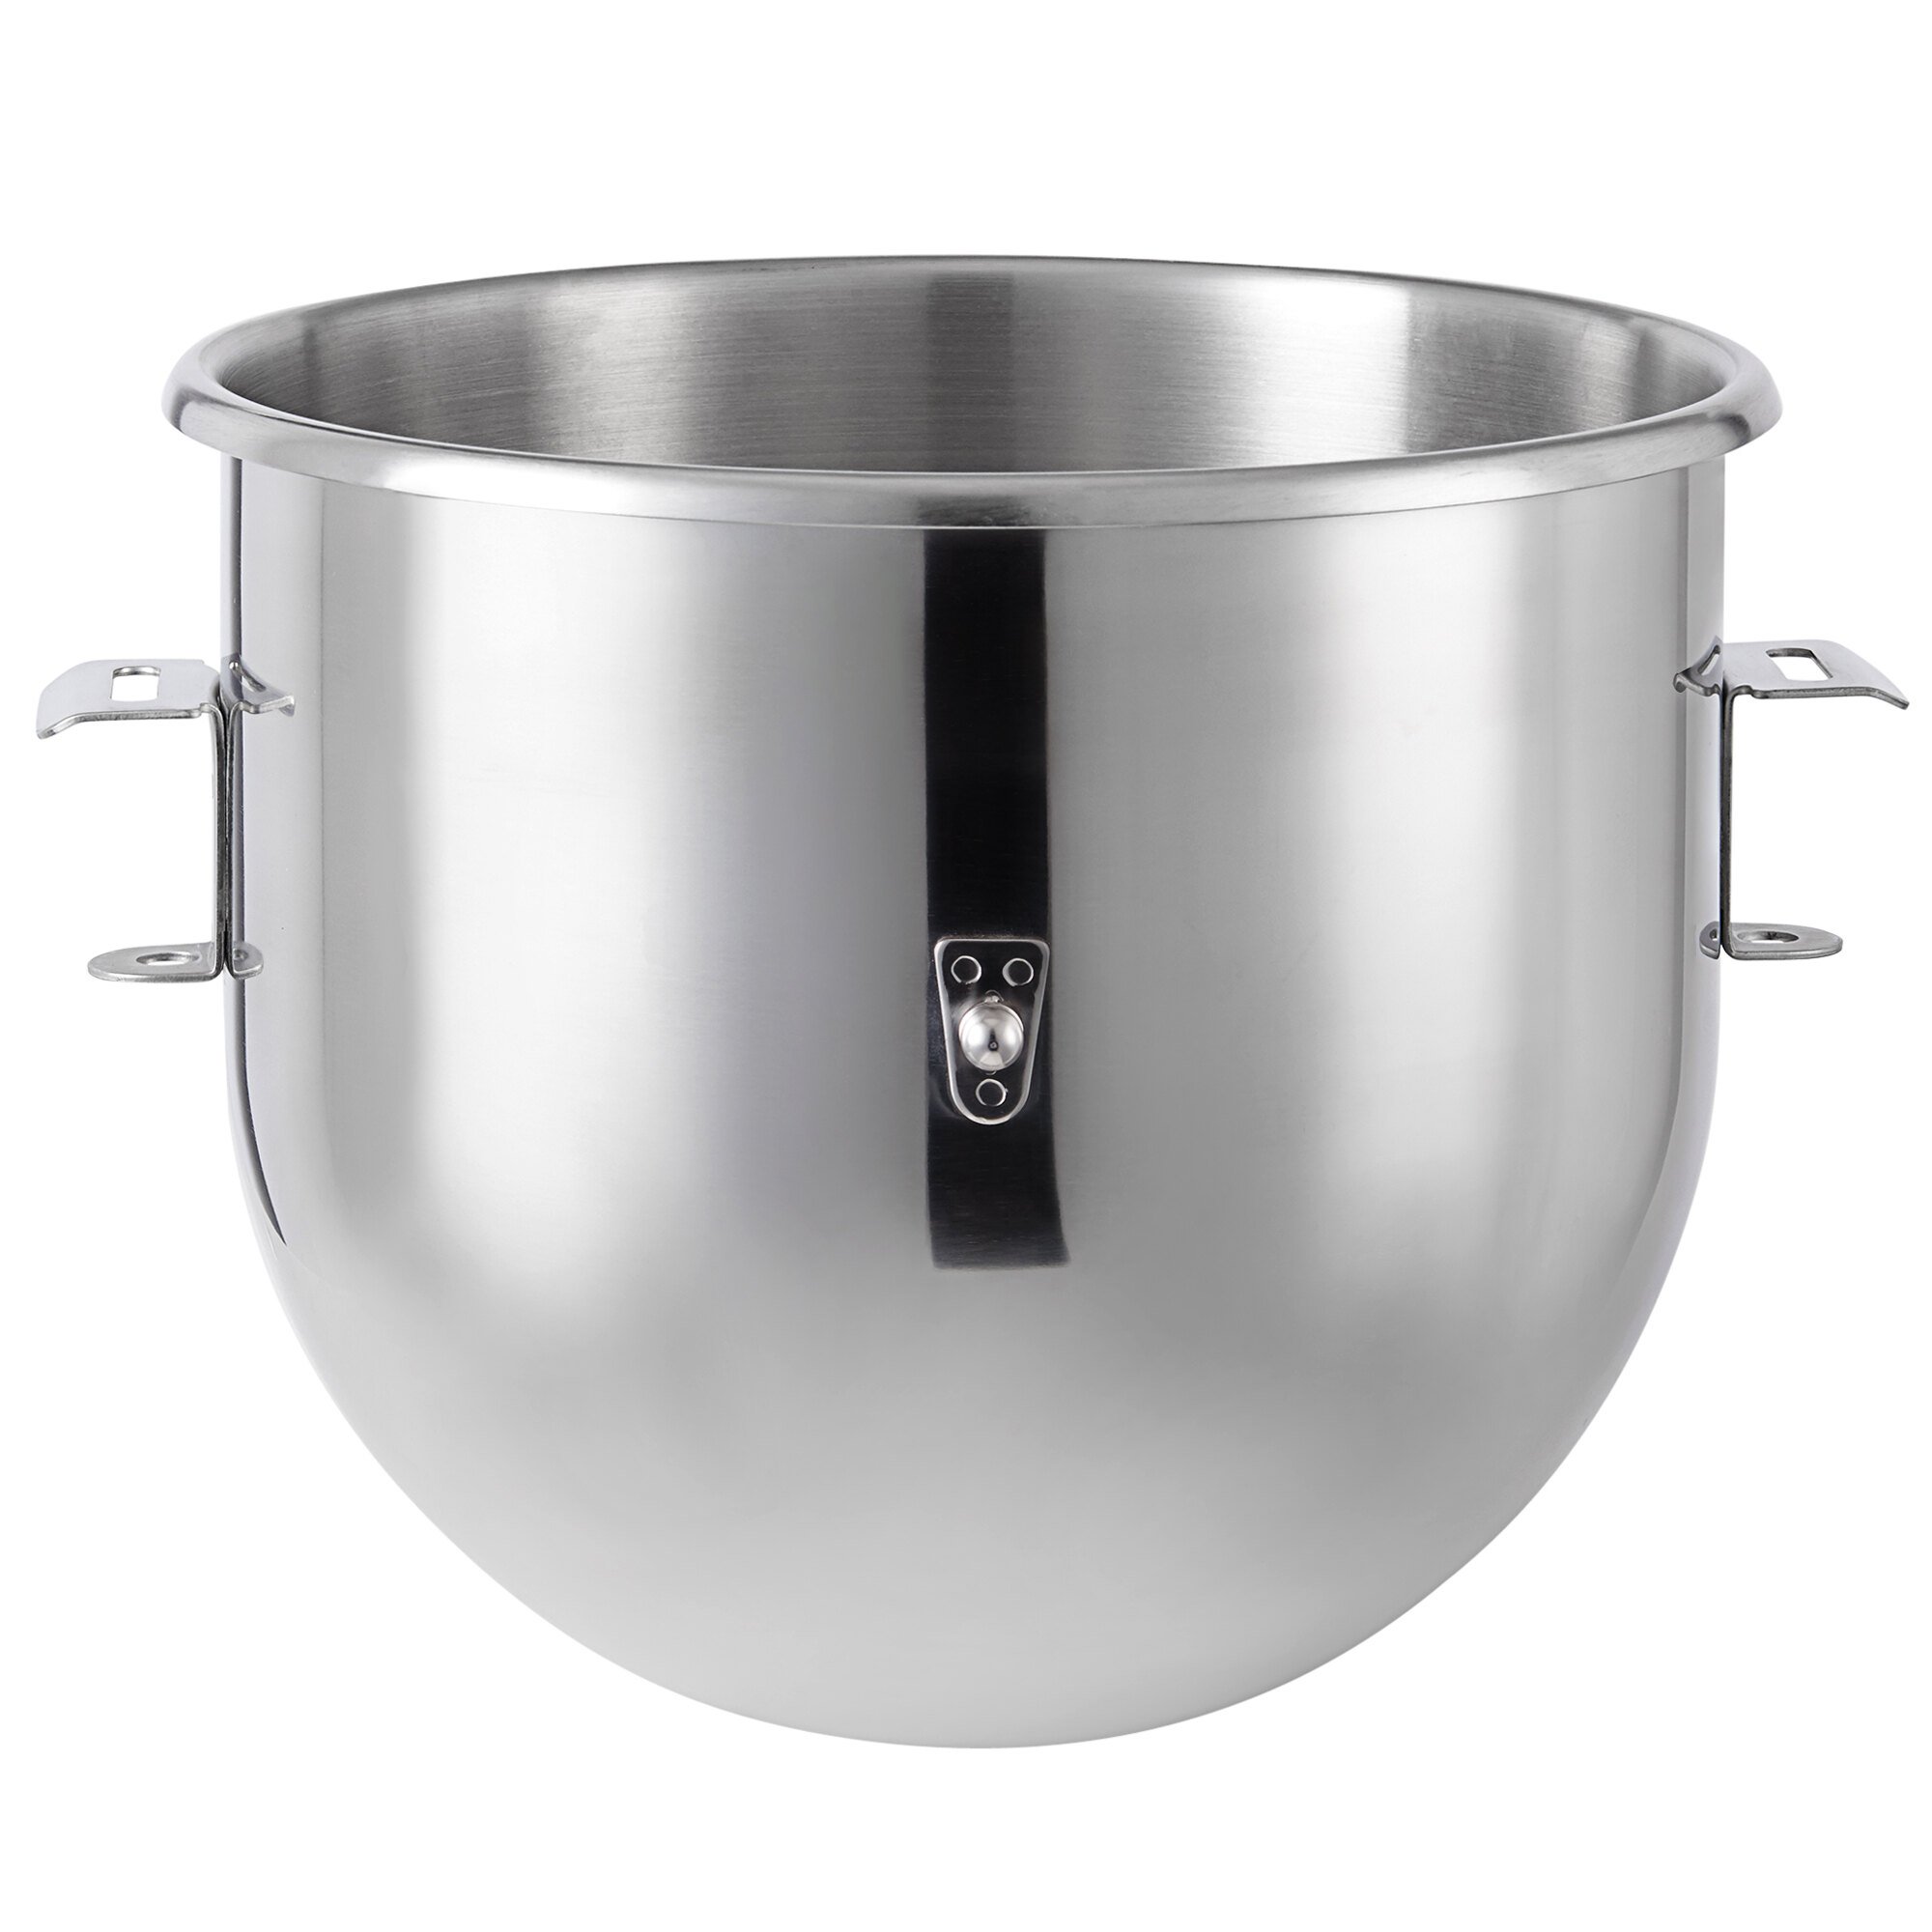 Hobart Equivalent 20 Qt. Stainless Steel Mixing Bowl for Classic Mixers 20 Qt Stainless Steel Mixing Bowl